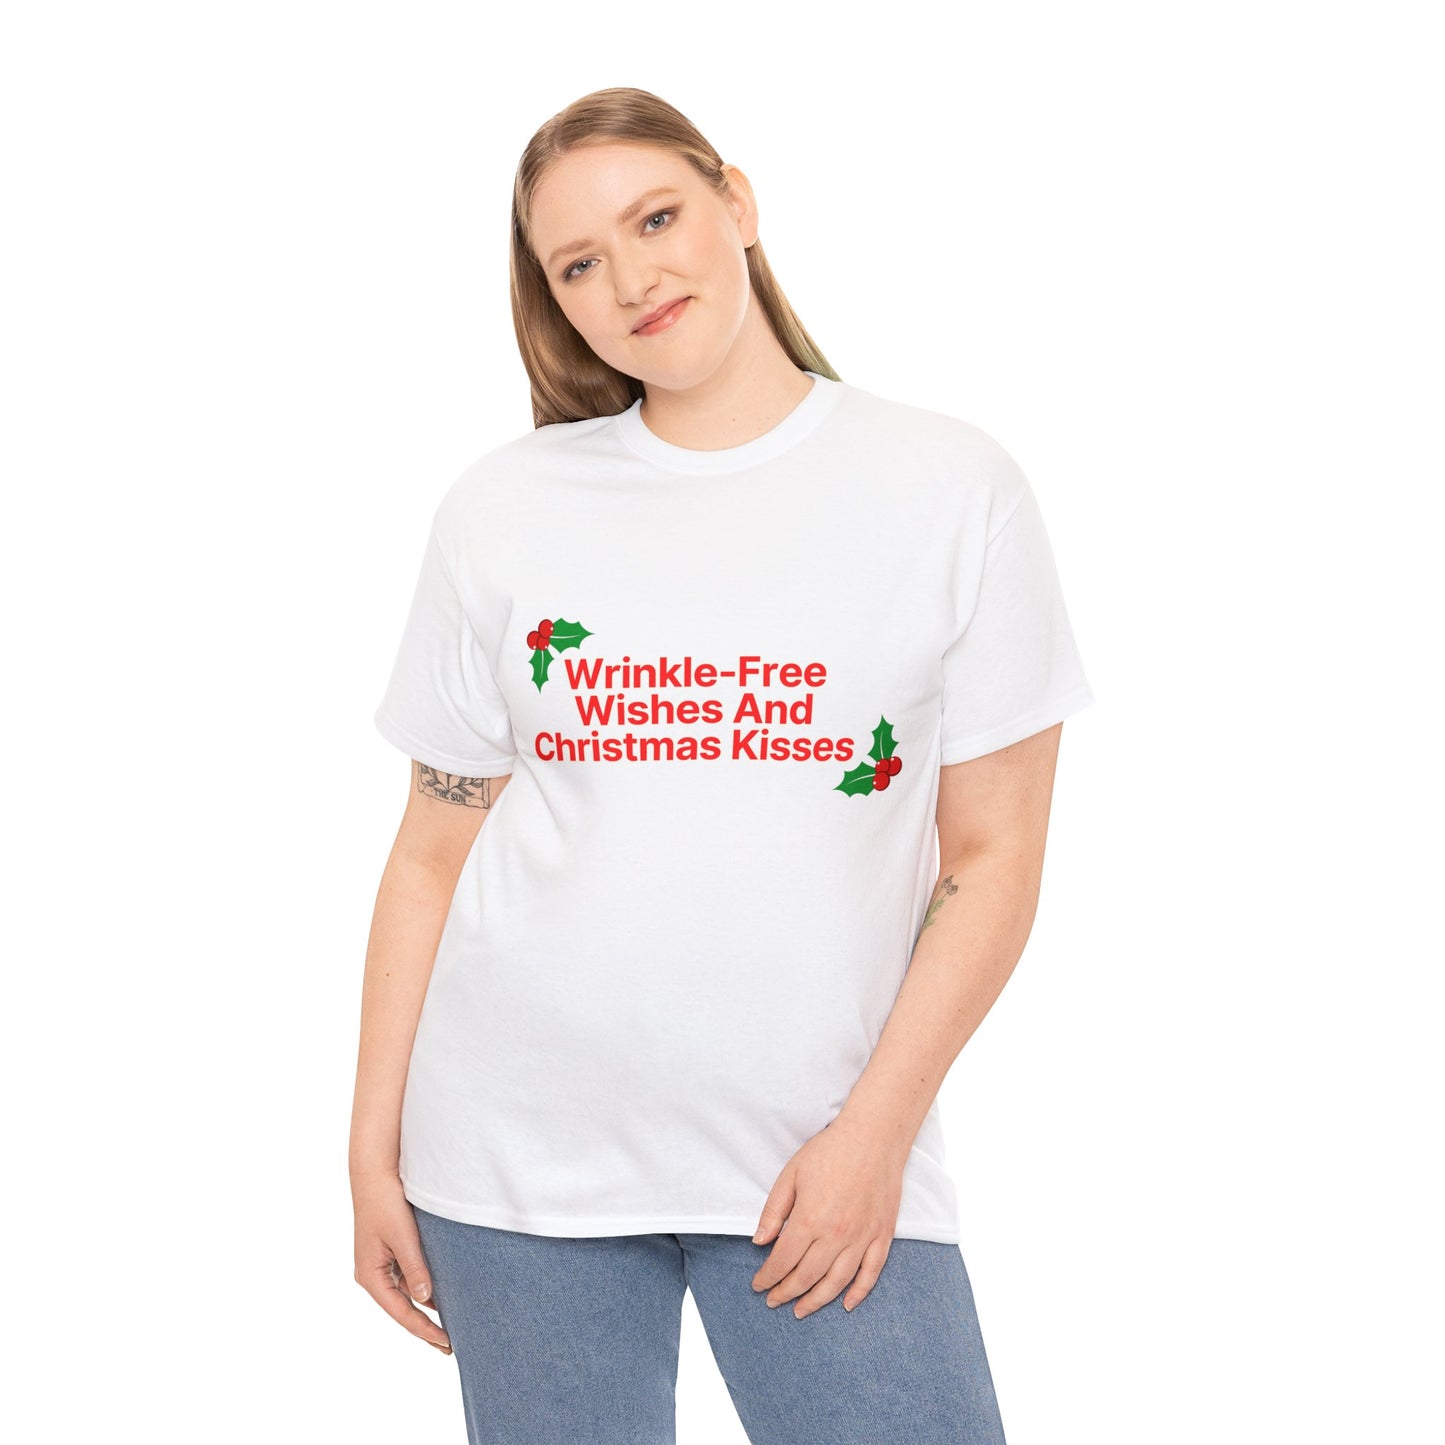 Wrinkle-Free Wishes T-Shirt